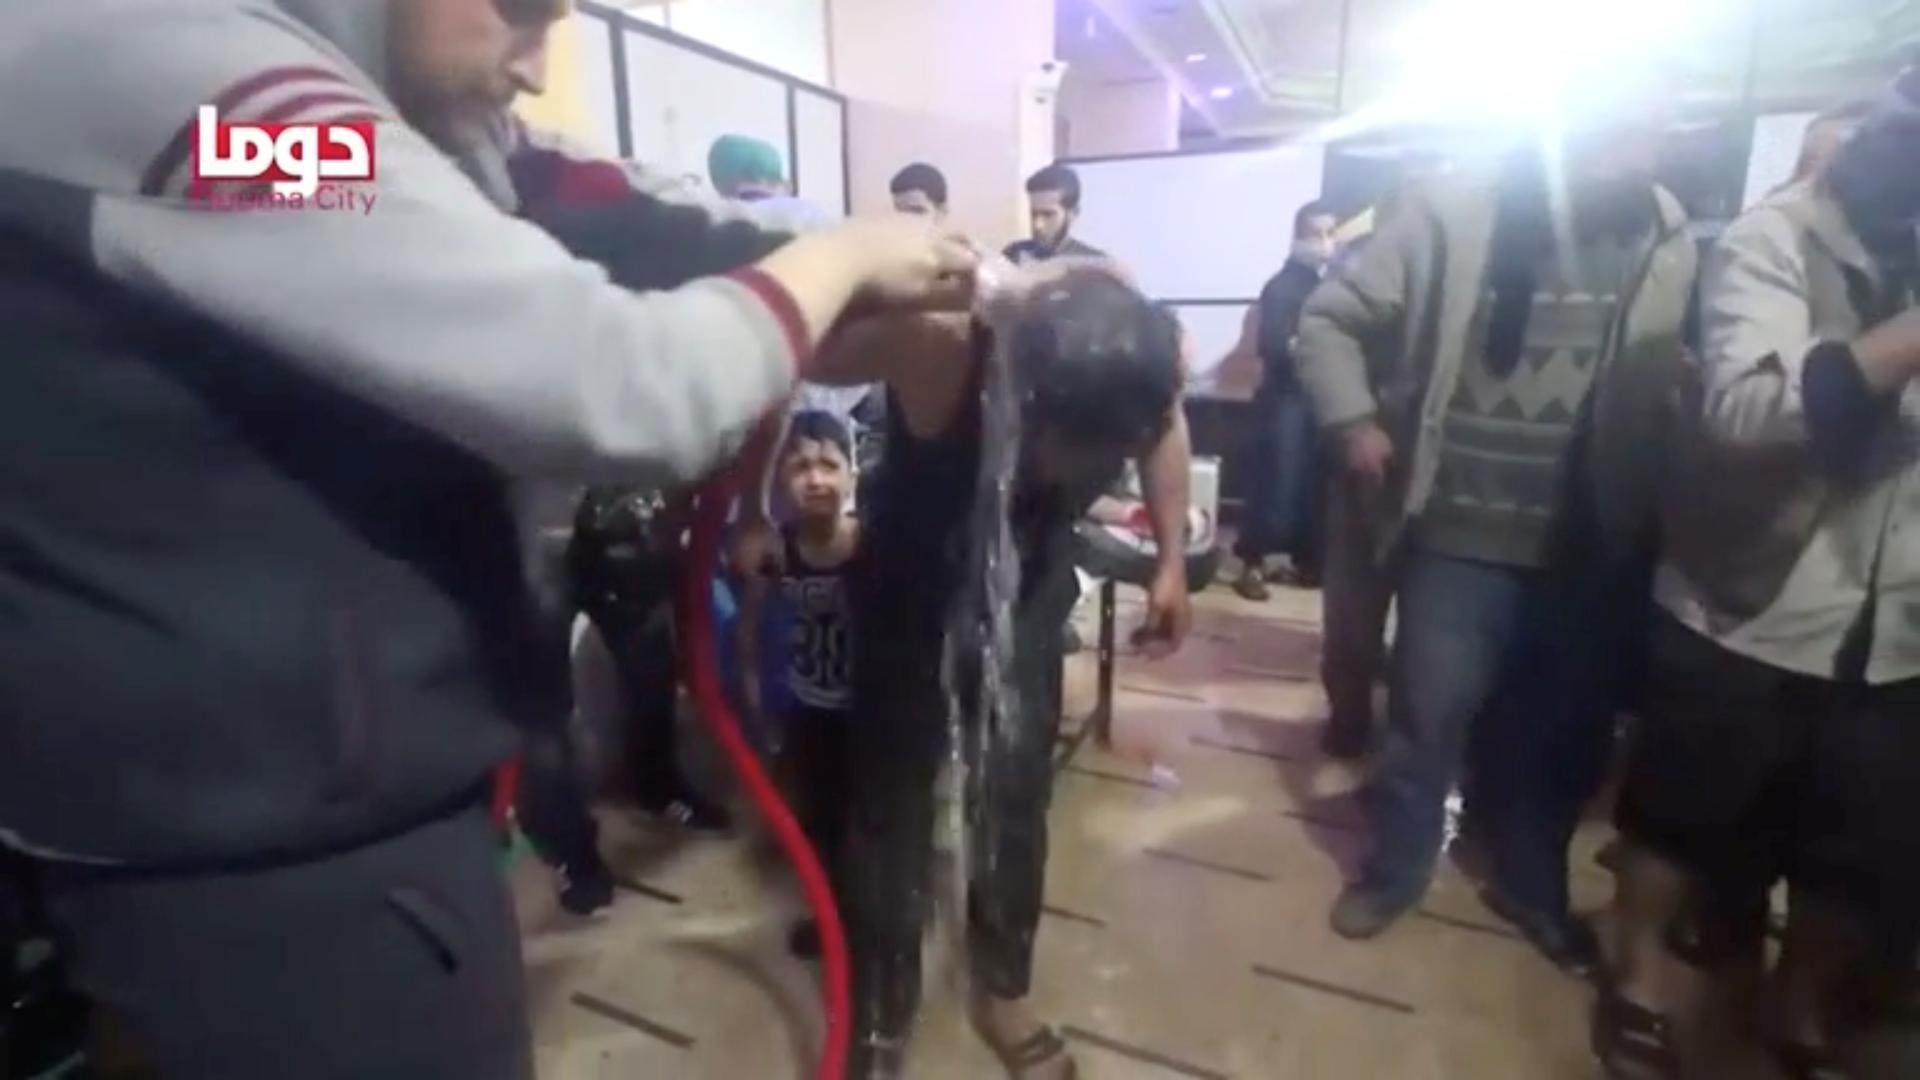 A man is washed following alleged chemical weapons attack, in what is said to be Duma, Syria in this still image from video obtained by Reuters on April 8, 2018.